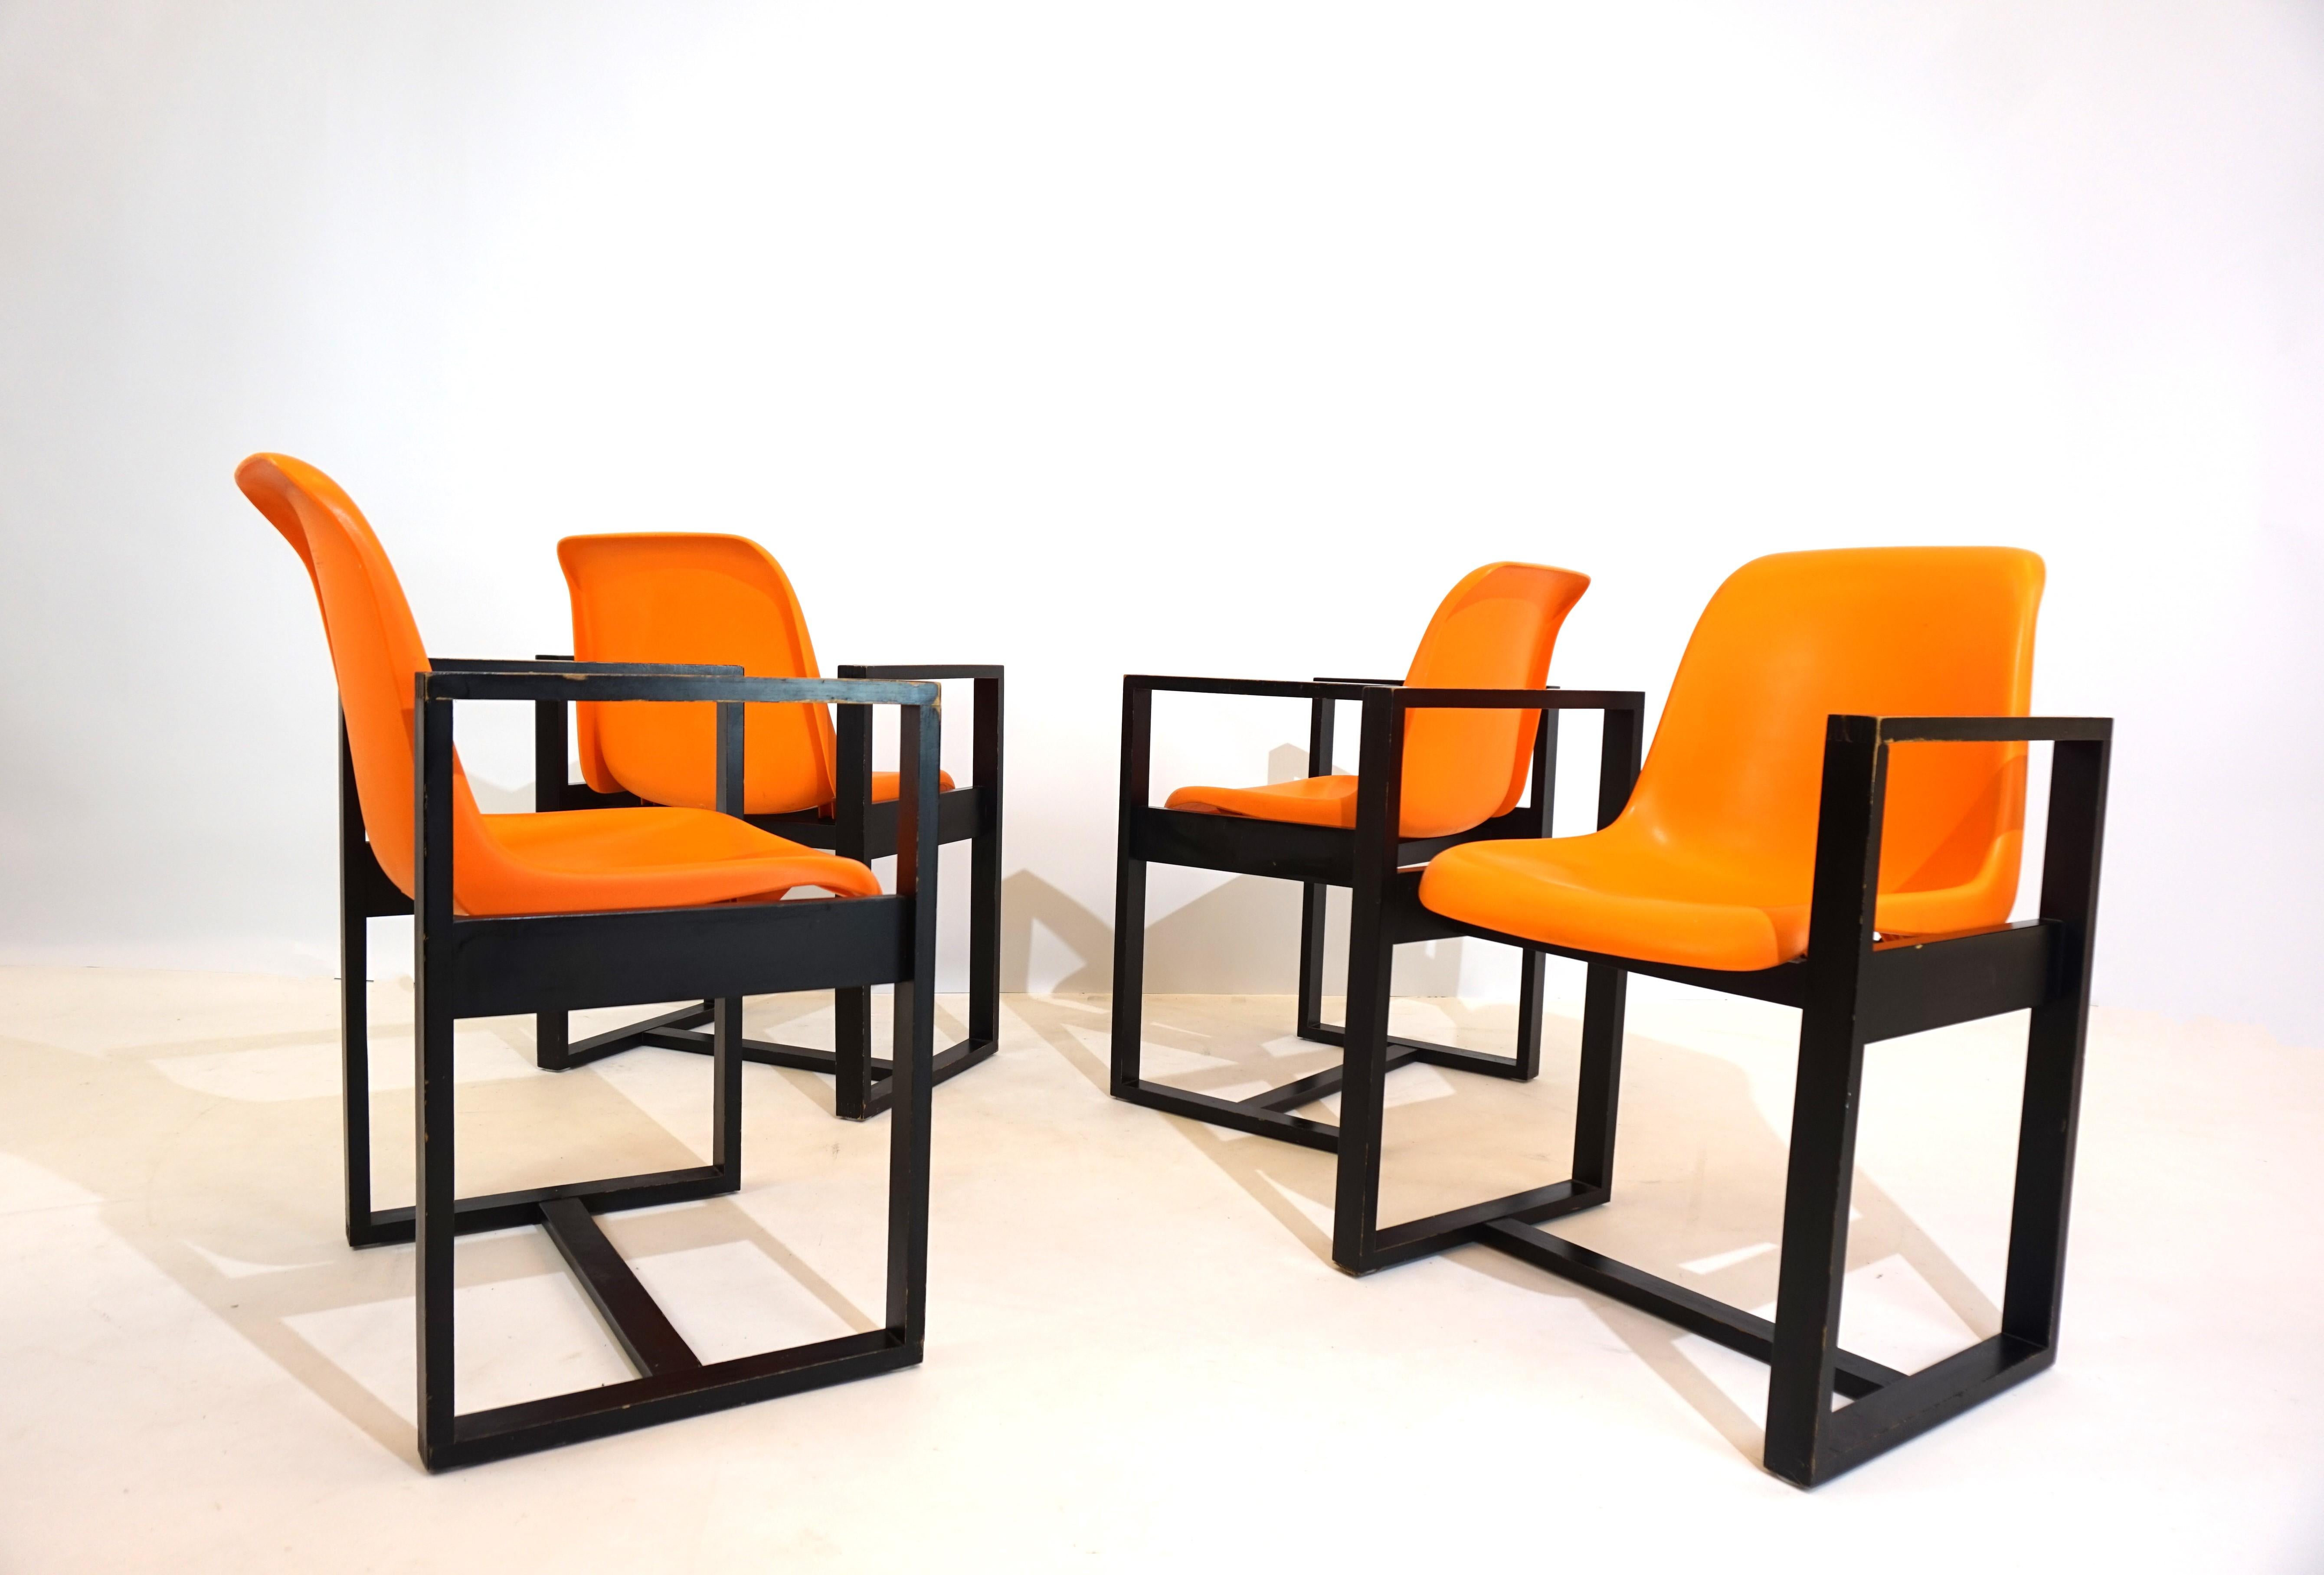 The set of 4 unusual dining/office chairs was designed and produced by mann Möbel in the 1970s. The unusual combination of a wooden frame with a fiberglass shell makes these chairs something special. The seat shells, in the typical orange from 1972,